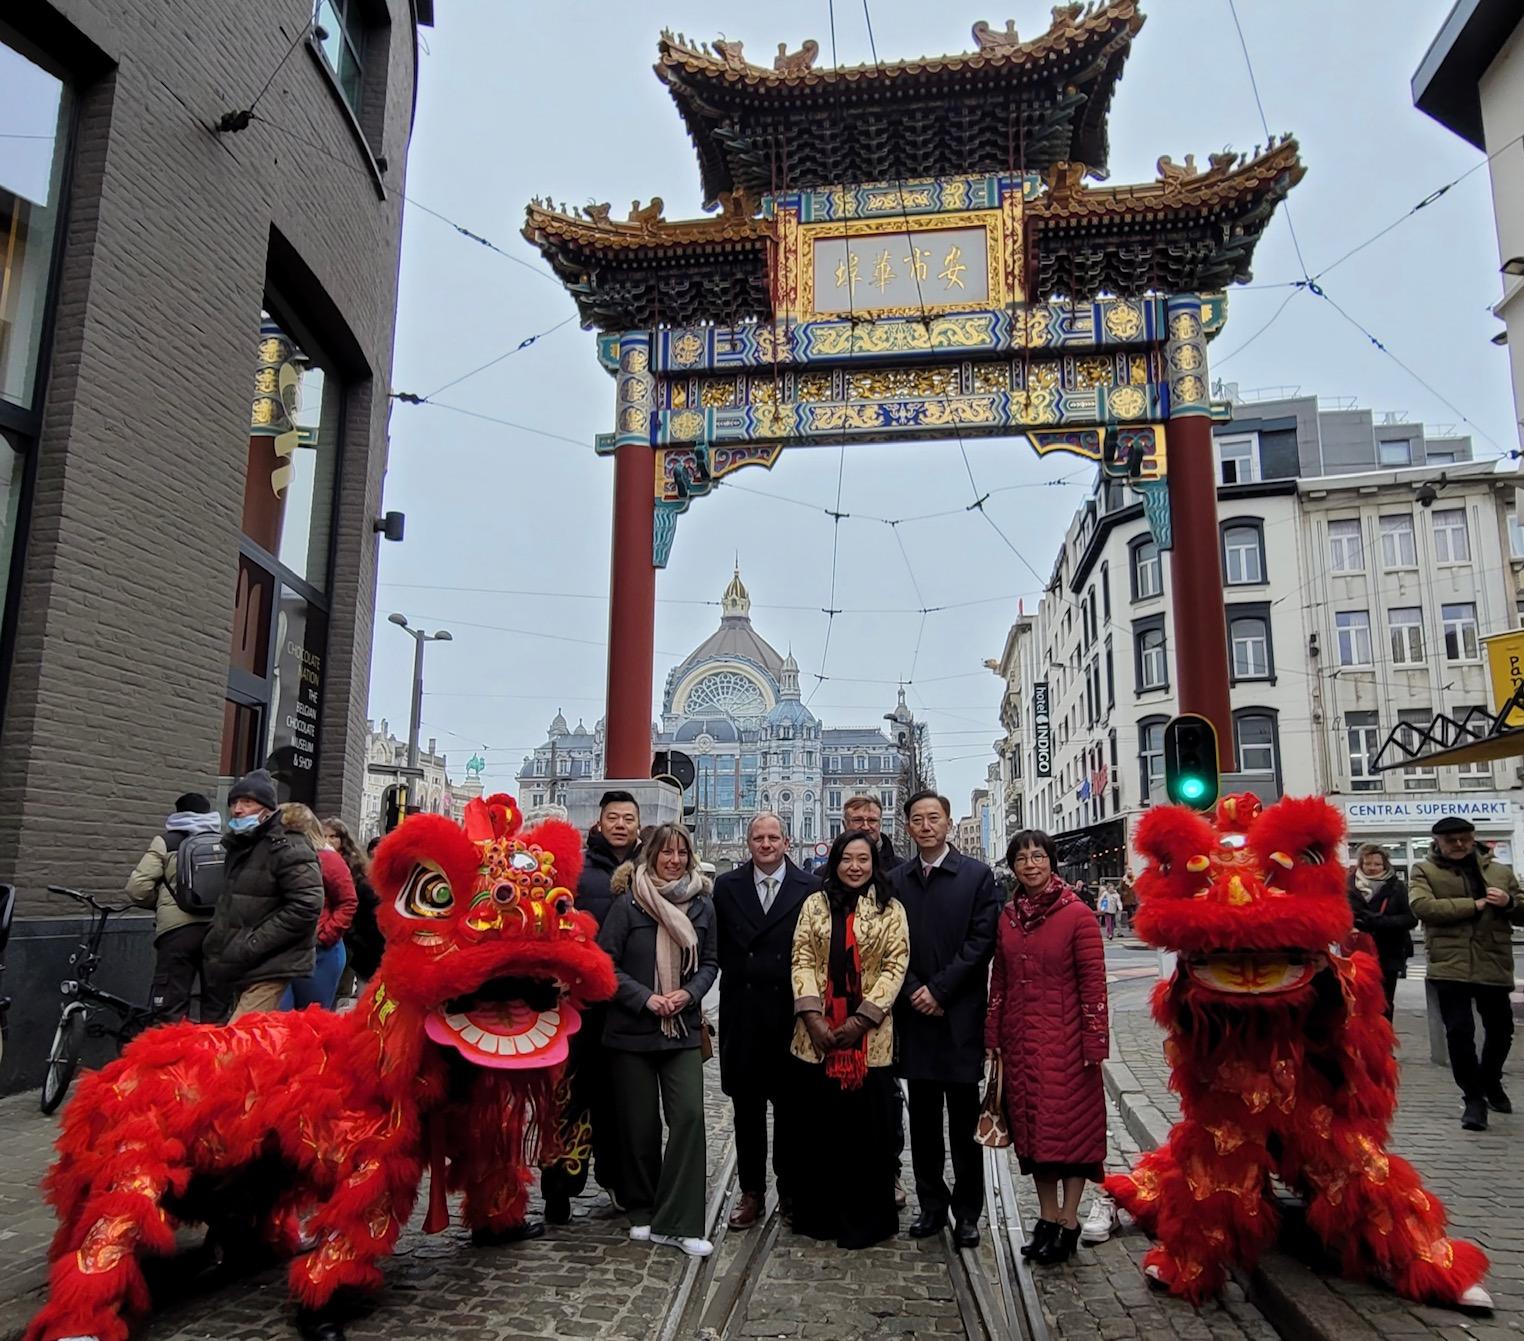 The Hong Kong Economic and Trade Office, Brussels is supporting the seventh edition of the "Legends of Lion Dance" held in the port city of Belgium, Antwerp, from January 13 to 29 (Antwerp time), showcasing Hong Kong's cultural heritage, crafts and Chinese New Year traditions. Photo shows the Acting Special Representative for Hong Kong Economic and Trade Affairs to the European Union, Miss Grace Li (fourth left); the Minister Counsellor of the Embassy of the People’s Republic of China in the Kingdom of Belgium, Mr Wu Gang (second right); the representative from the event’s organiser Asian Events Tofoe, Mr Joe Choi (first left); and other guests  at the Lion Dance Parade held during the “Legends of Lion Dance” at Antwerp, Belgium on January 22 (Antwerp time).